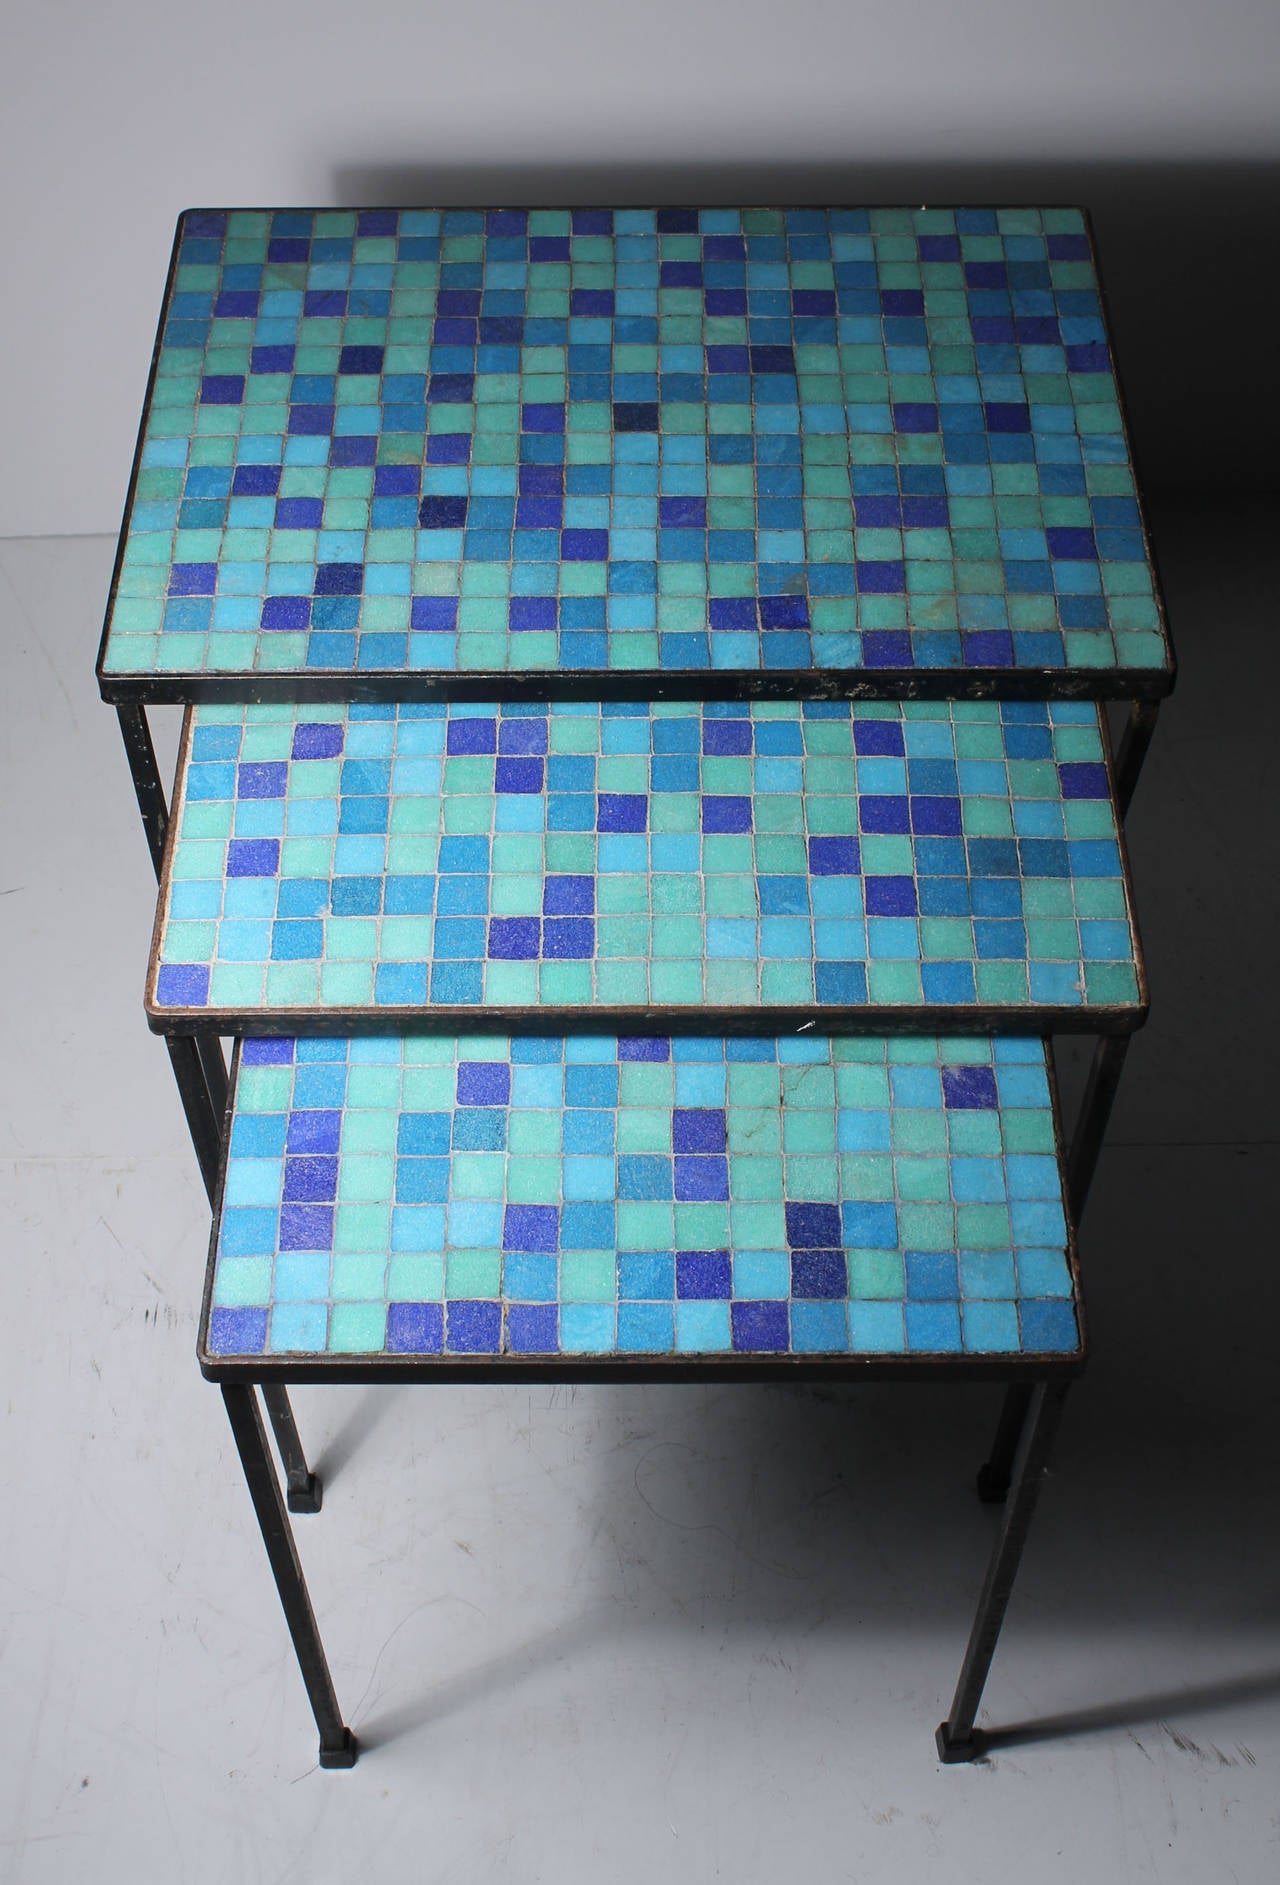 Vintage Mosaic Tile Nesting Tables. Beautiful ocean colors!

Produced either in America or Italy.

Dimensions:
17.5